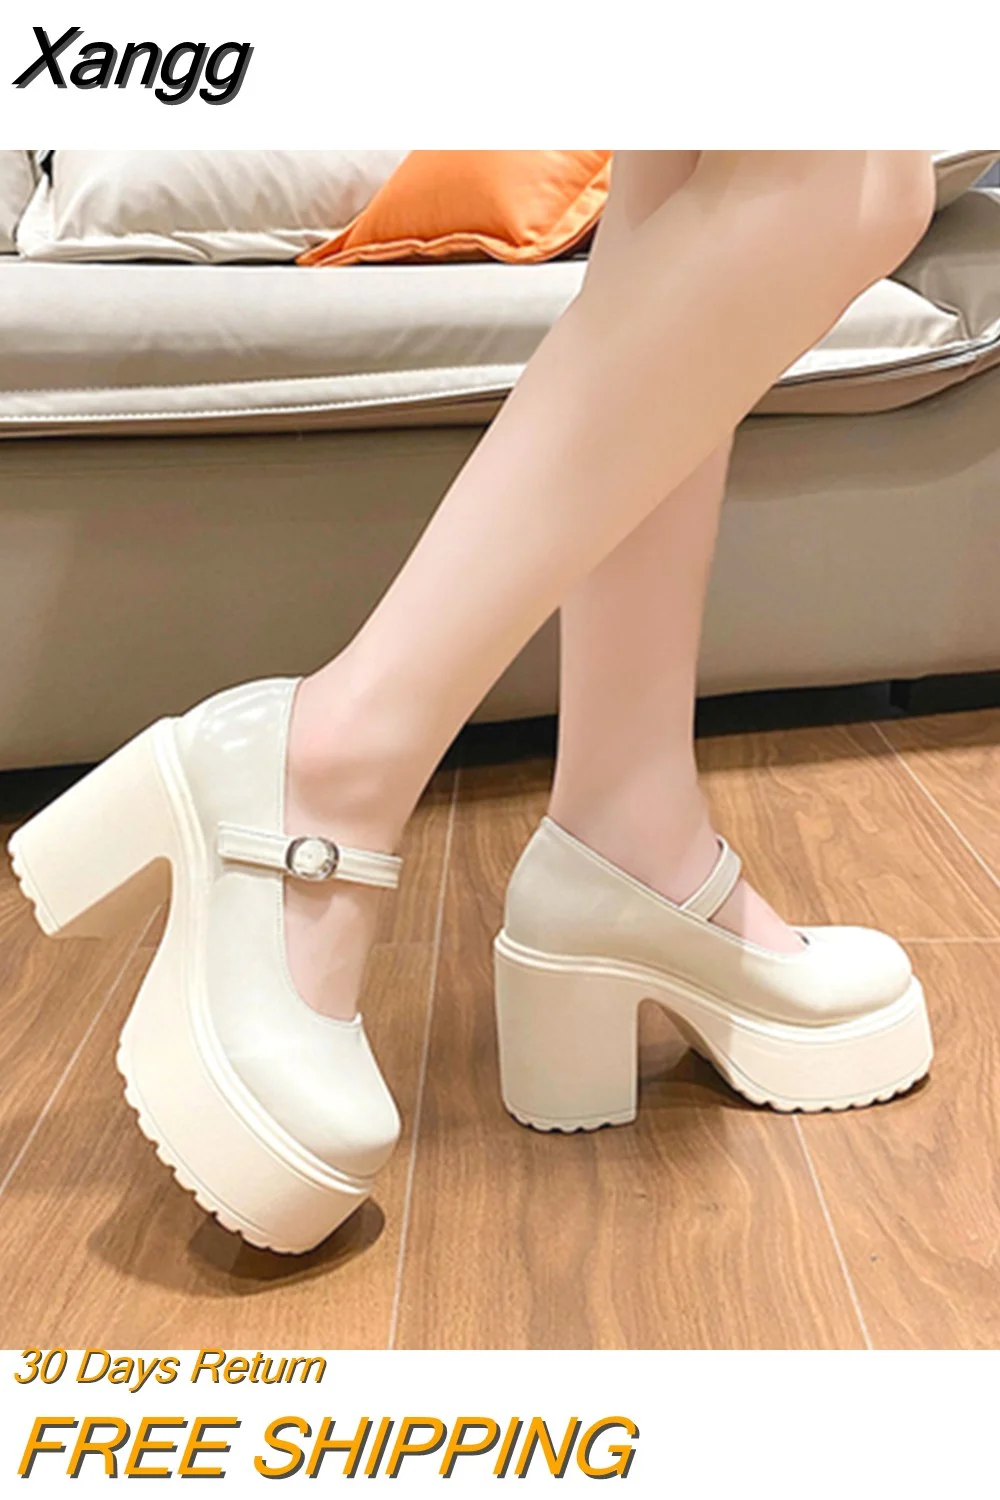 Xangg White Mary Janes Super Thick High Heels Platforms Pumps for Women Casual Spring Summer Shallow Party Chunky Shoes Ladies